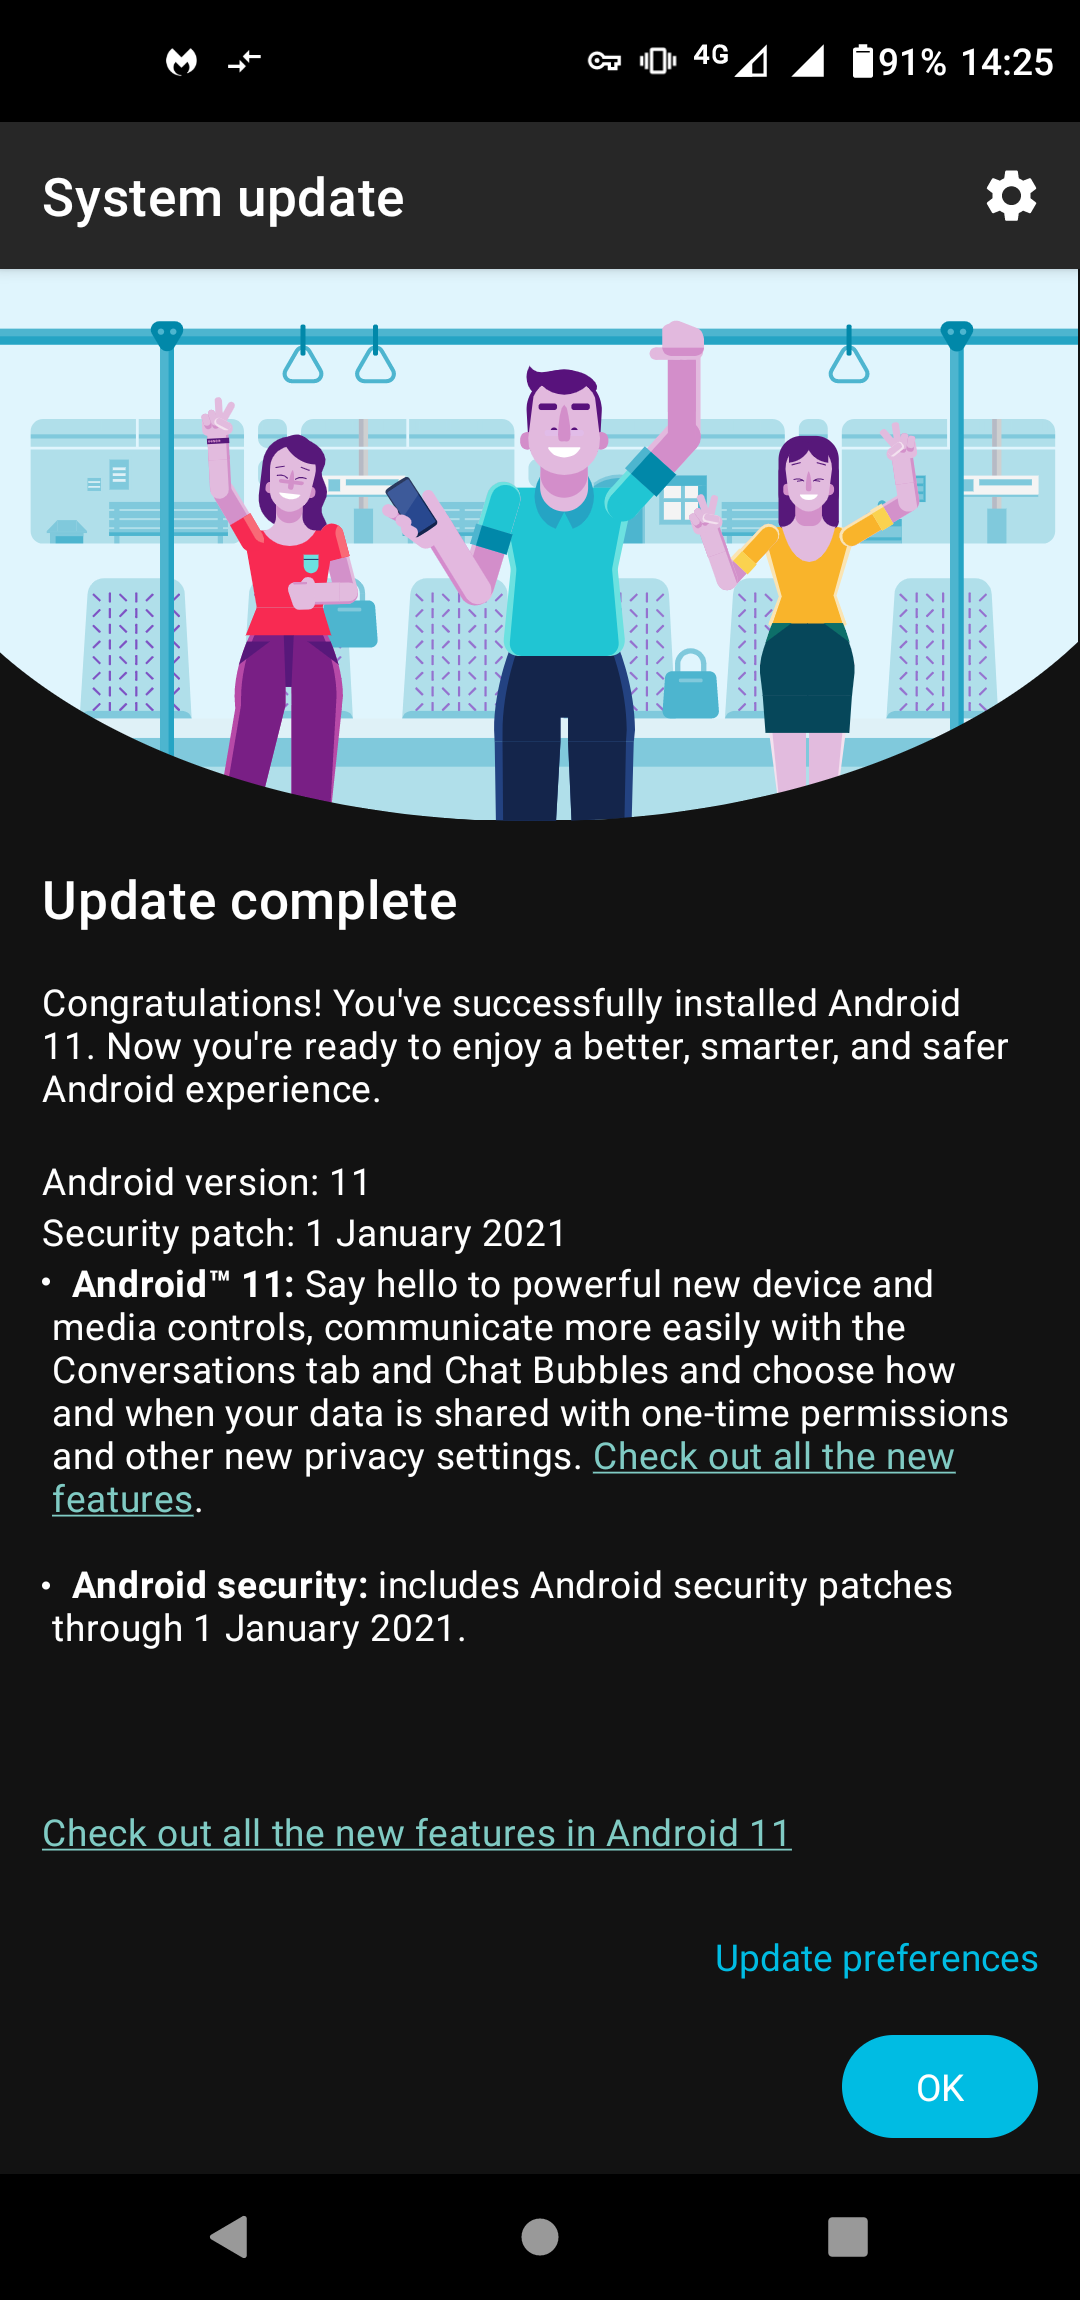 Moto G Pro Android 11 update - Motorola's Android 11 rollout finally begins with a mid-ranger